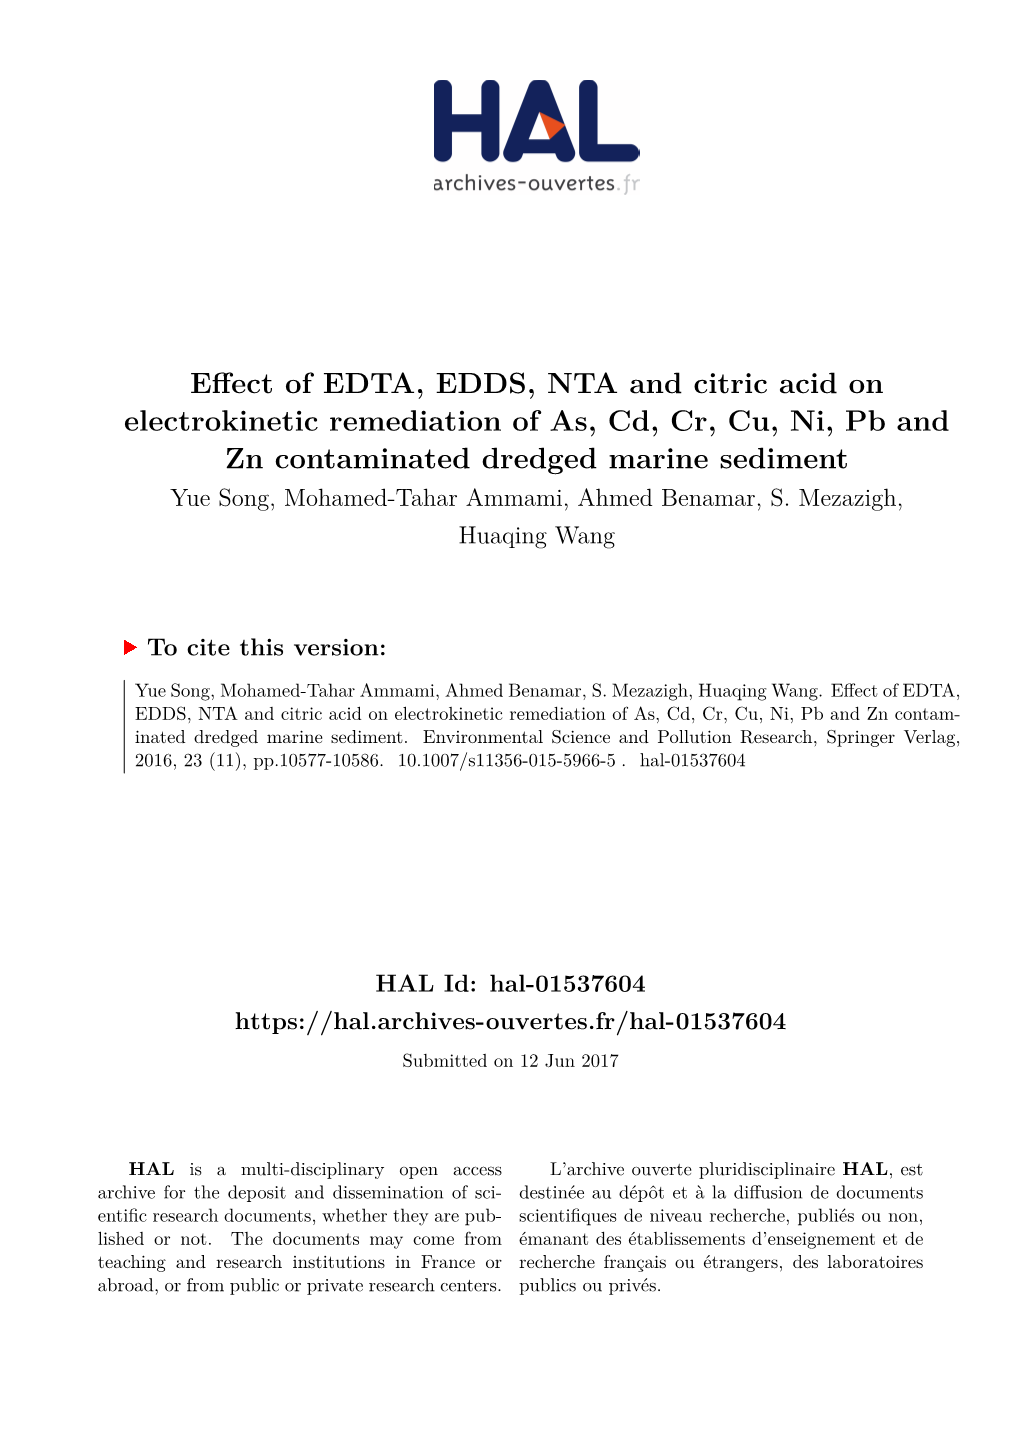 Effect of EDTA, EDDS, NTA and Citric Acid on Electrokinetic Remediation of As, Cd, Cr, Cu, Ni, Pb and Zn Contam- Inated Dredged Marine Sediment